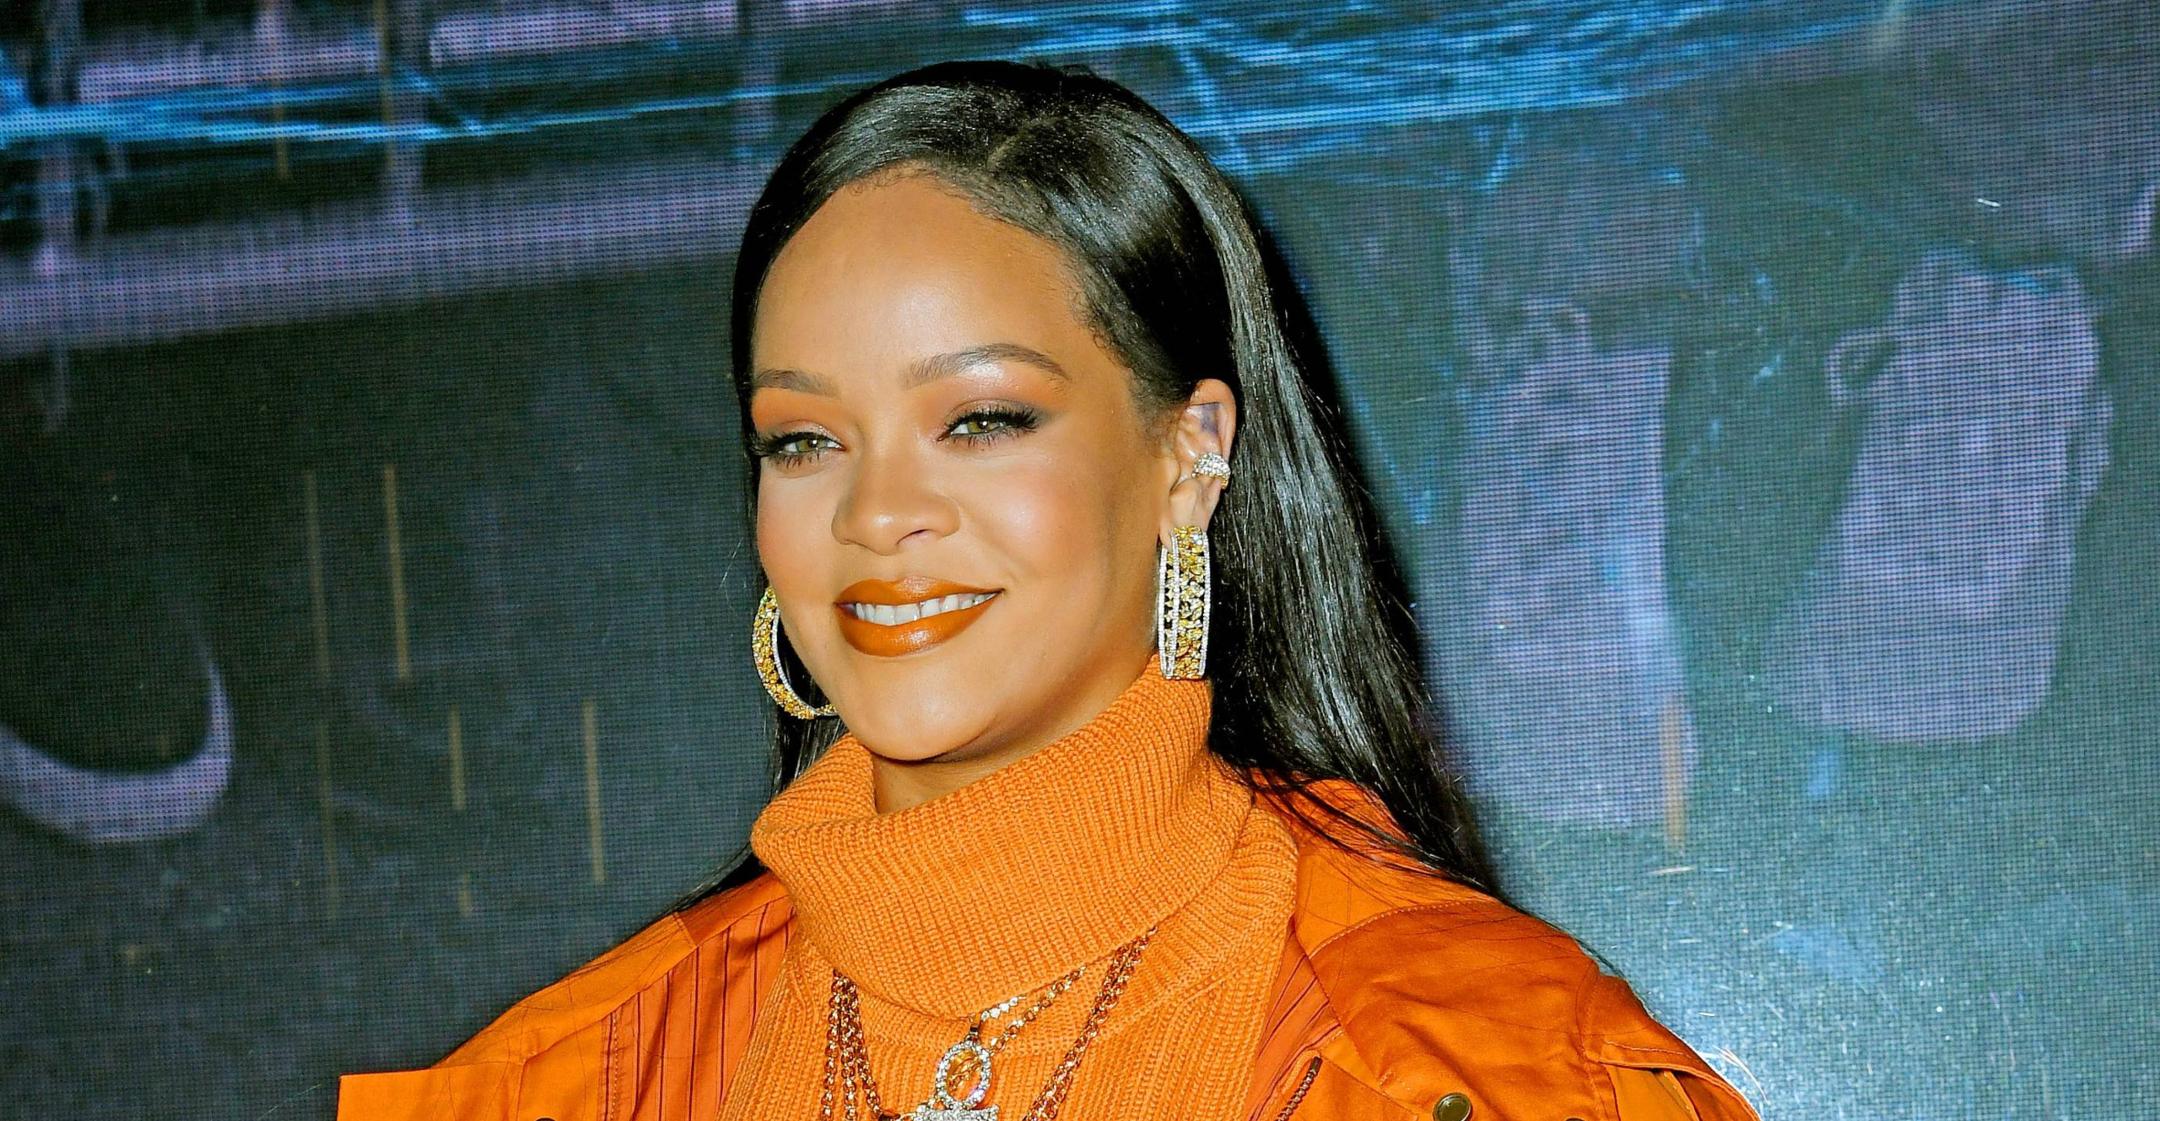 Rihanna Is Now A Billionaire, Claims 'Forbes' — Details On Her Fortune